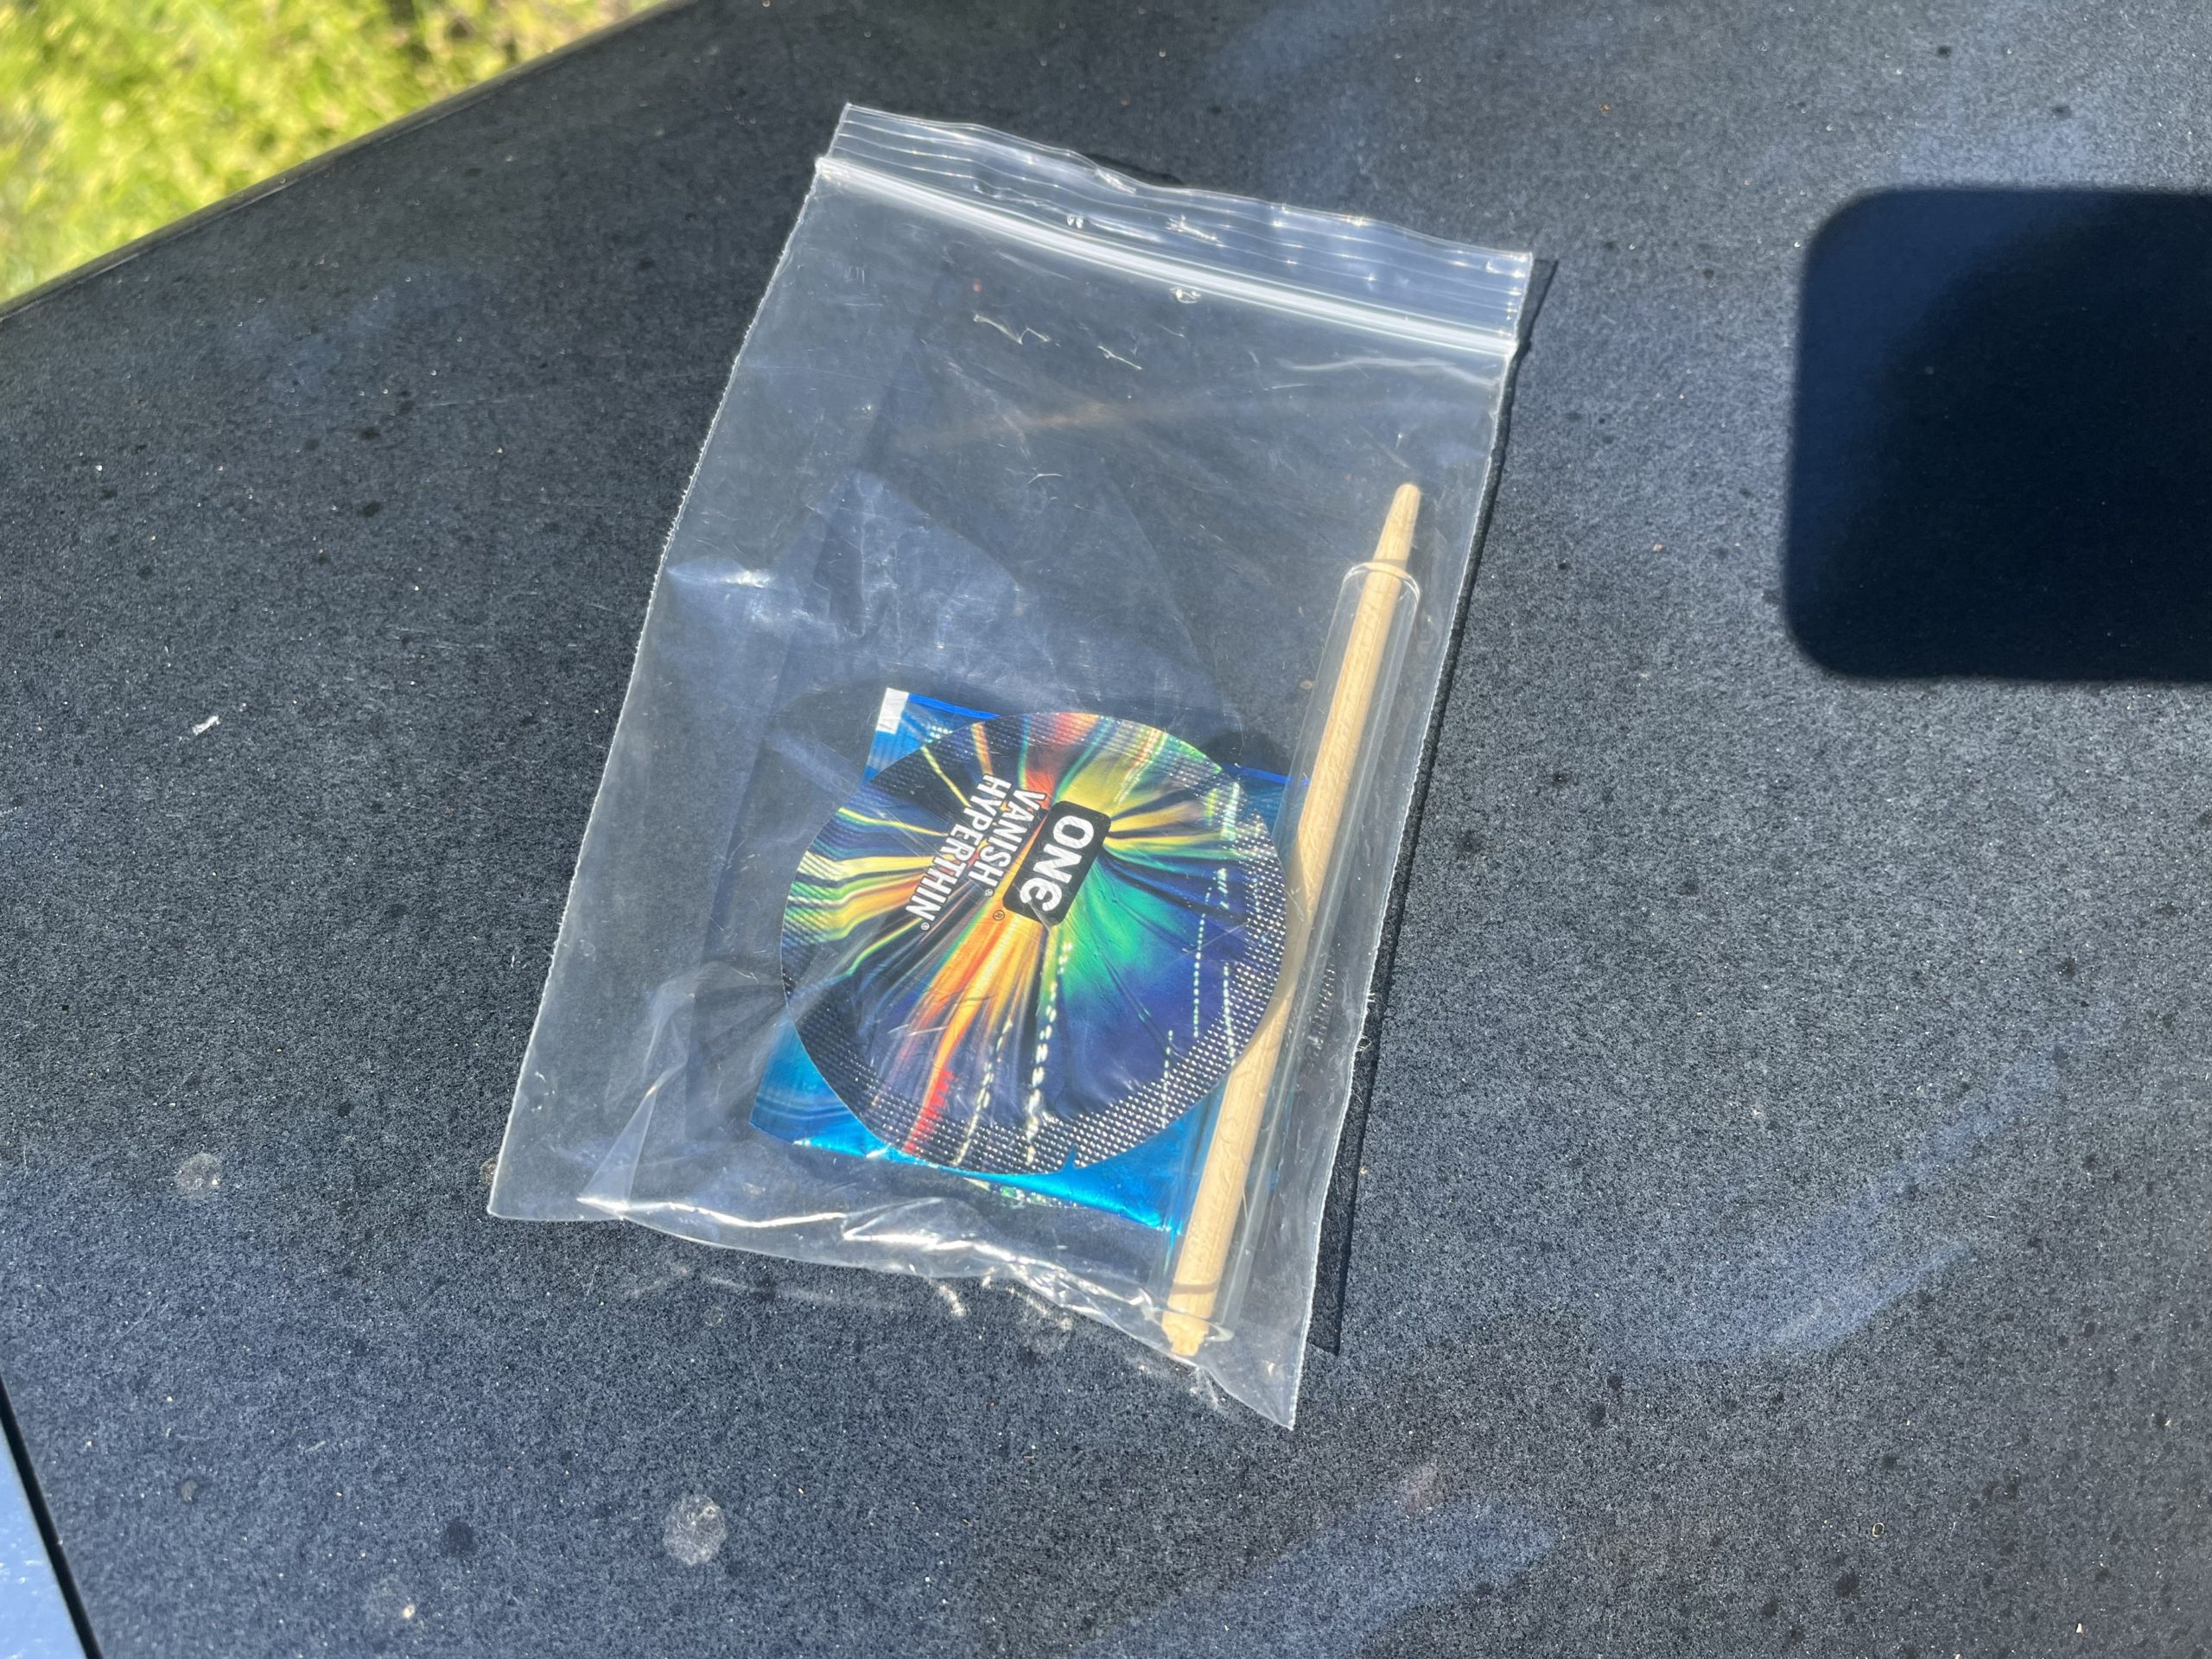 A condom and crack pipe acquired from New York Harm Reduction Educators. (Daily Caller)